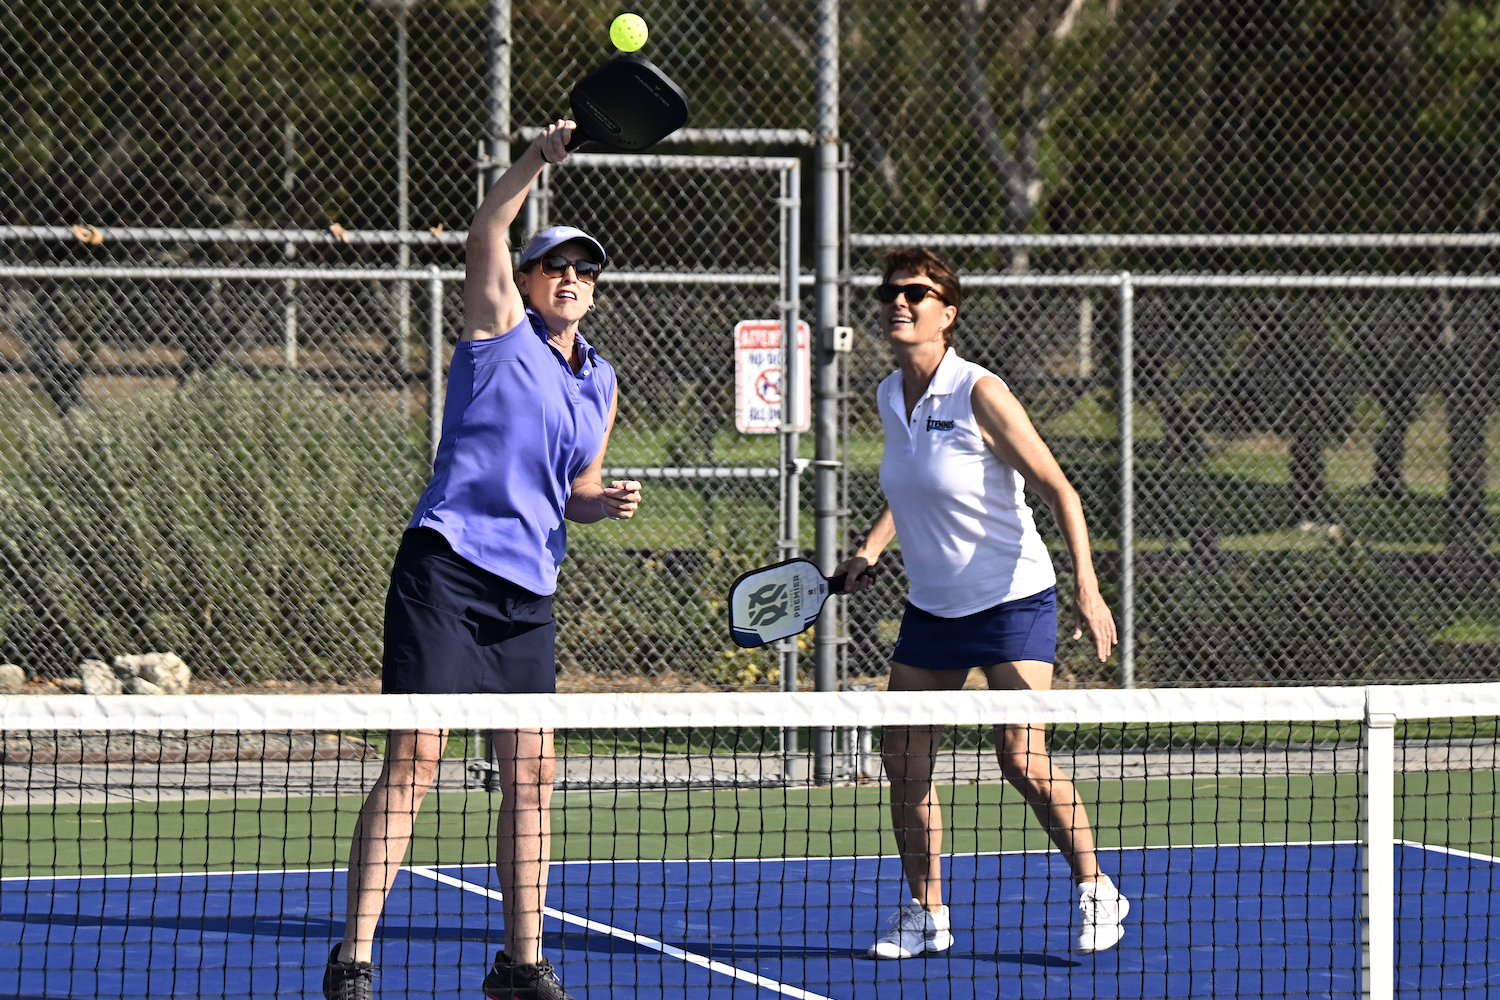 People play pickleball at the Arroyo Seco Racquet Club in South Pasadena